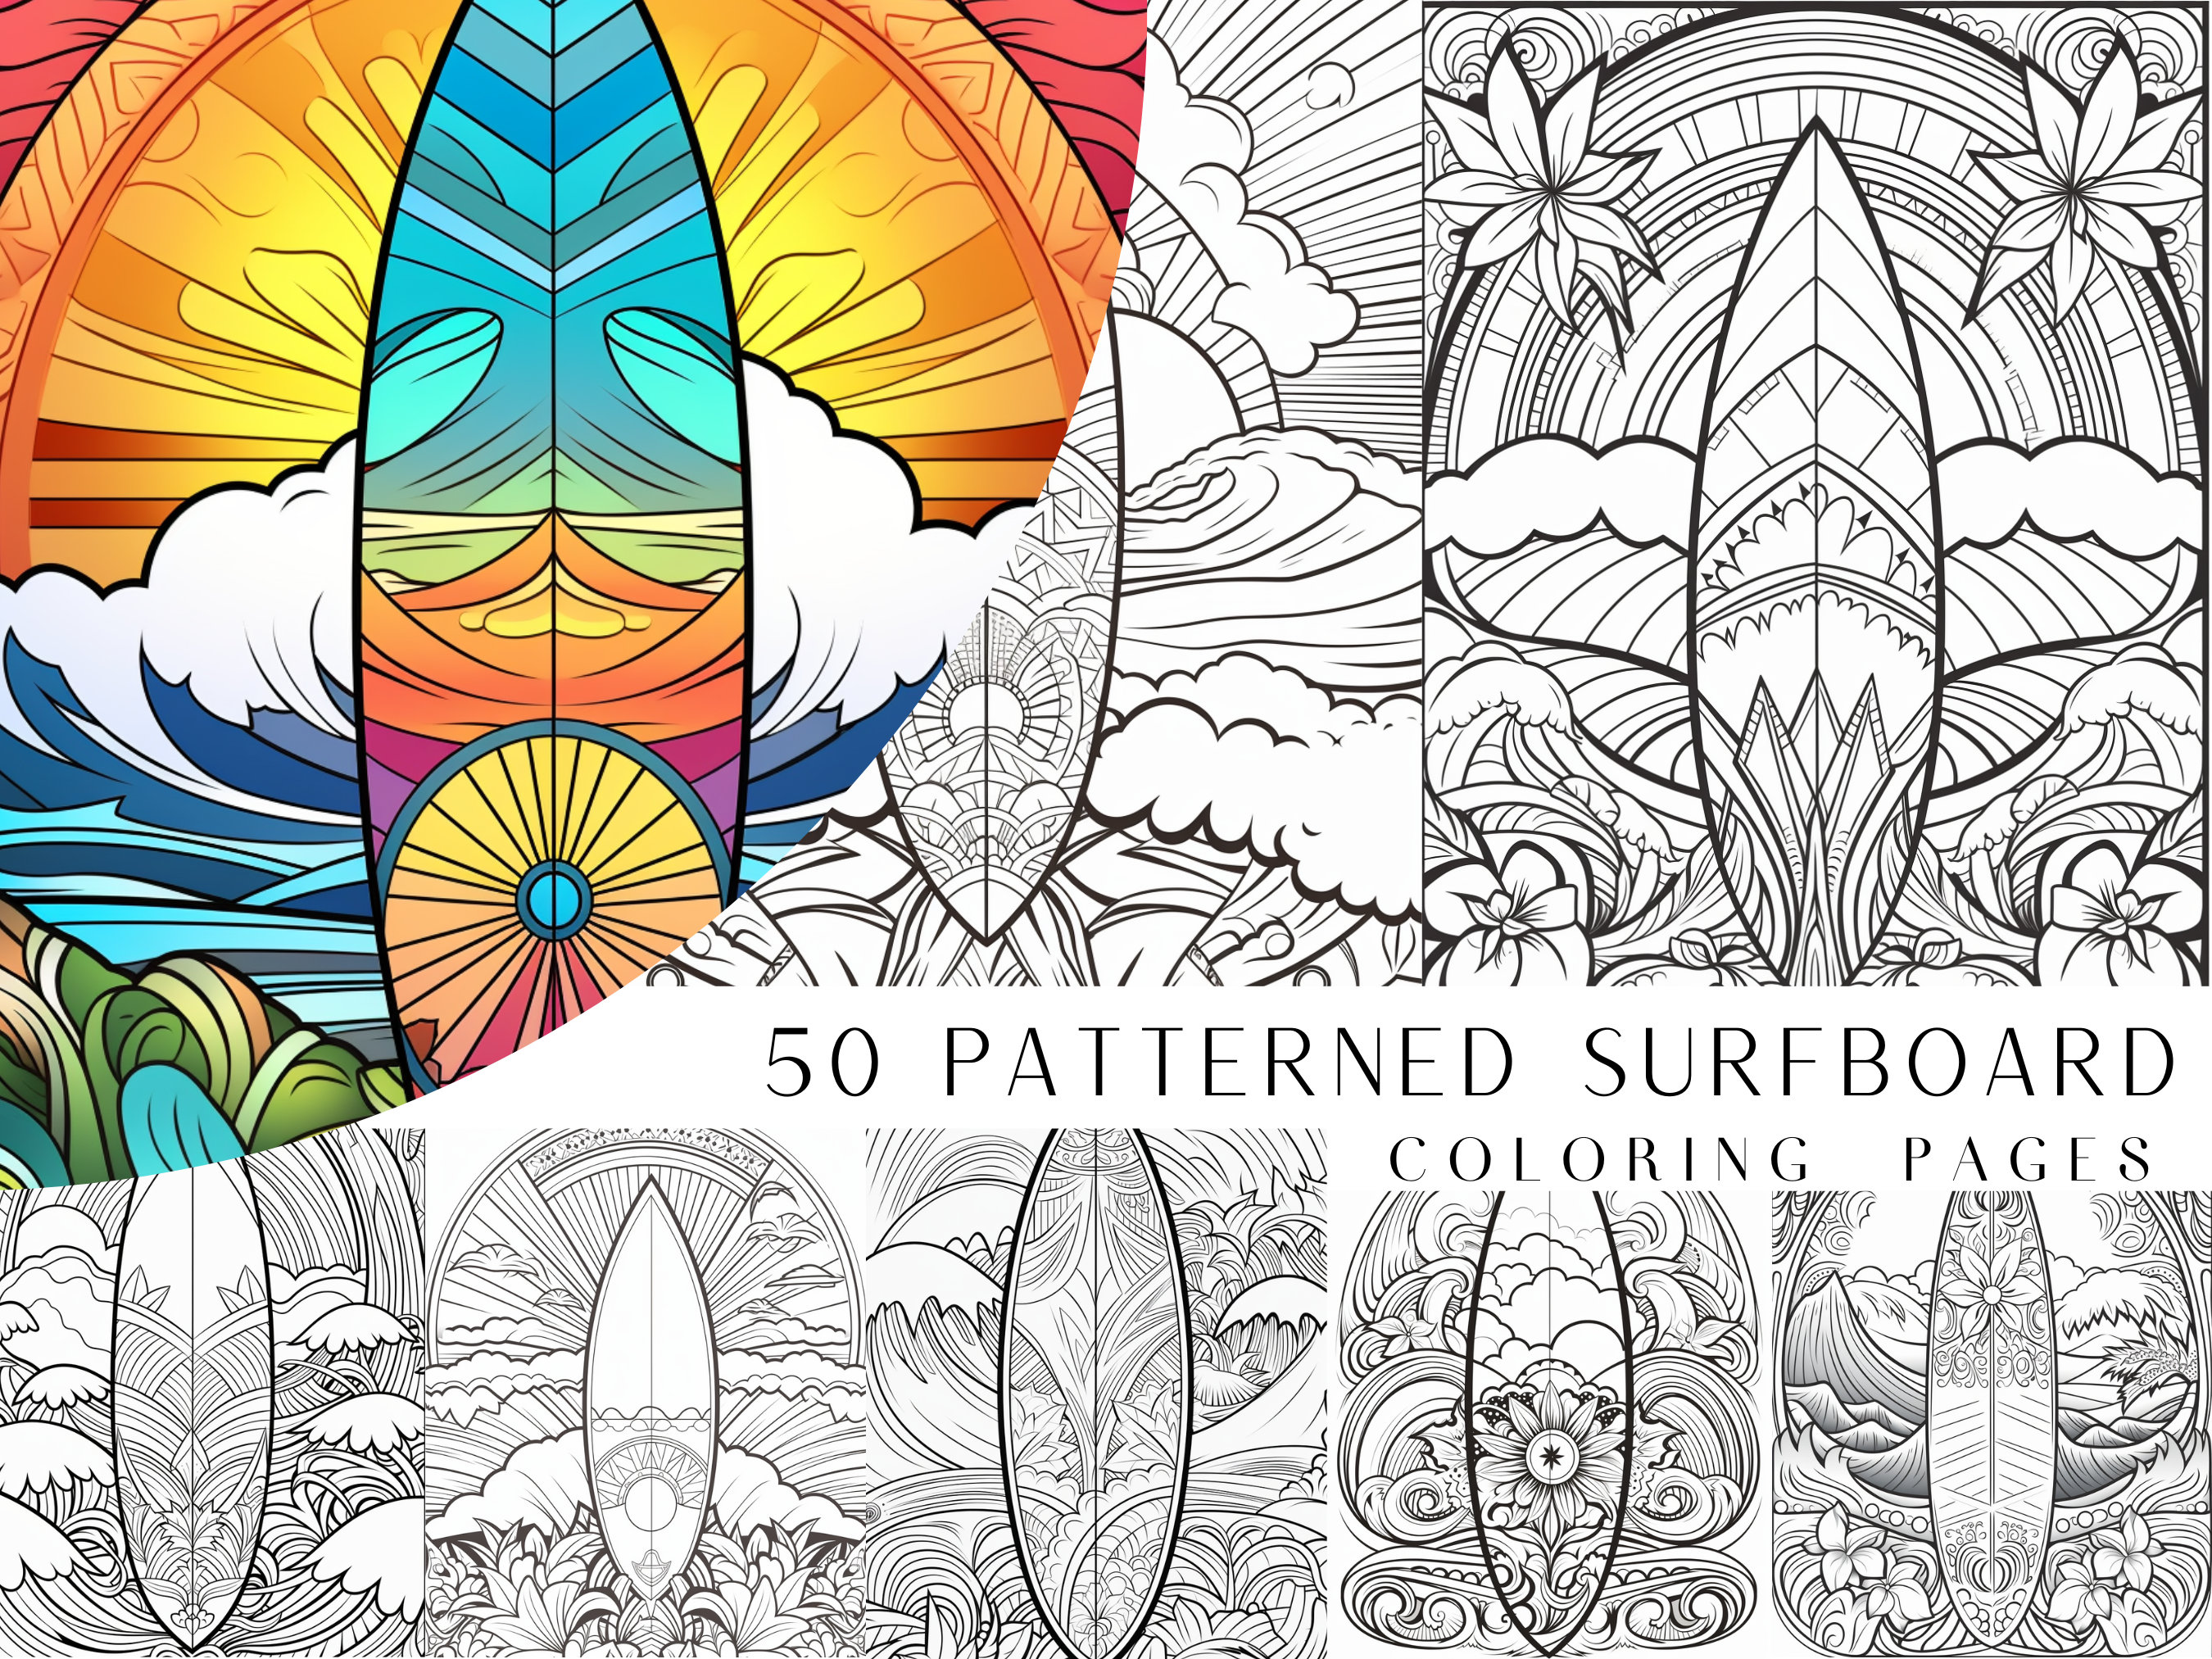 Patterned surfboard coloring pages adults and kids coloring book digital coloring sheets instant download printable pdf file download now